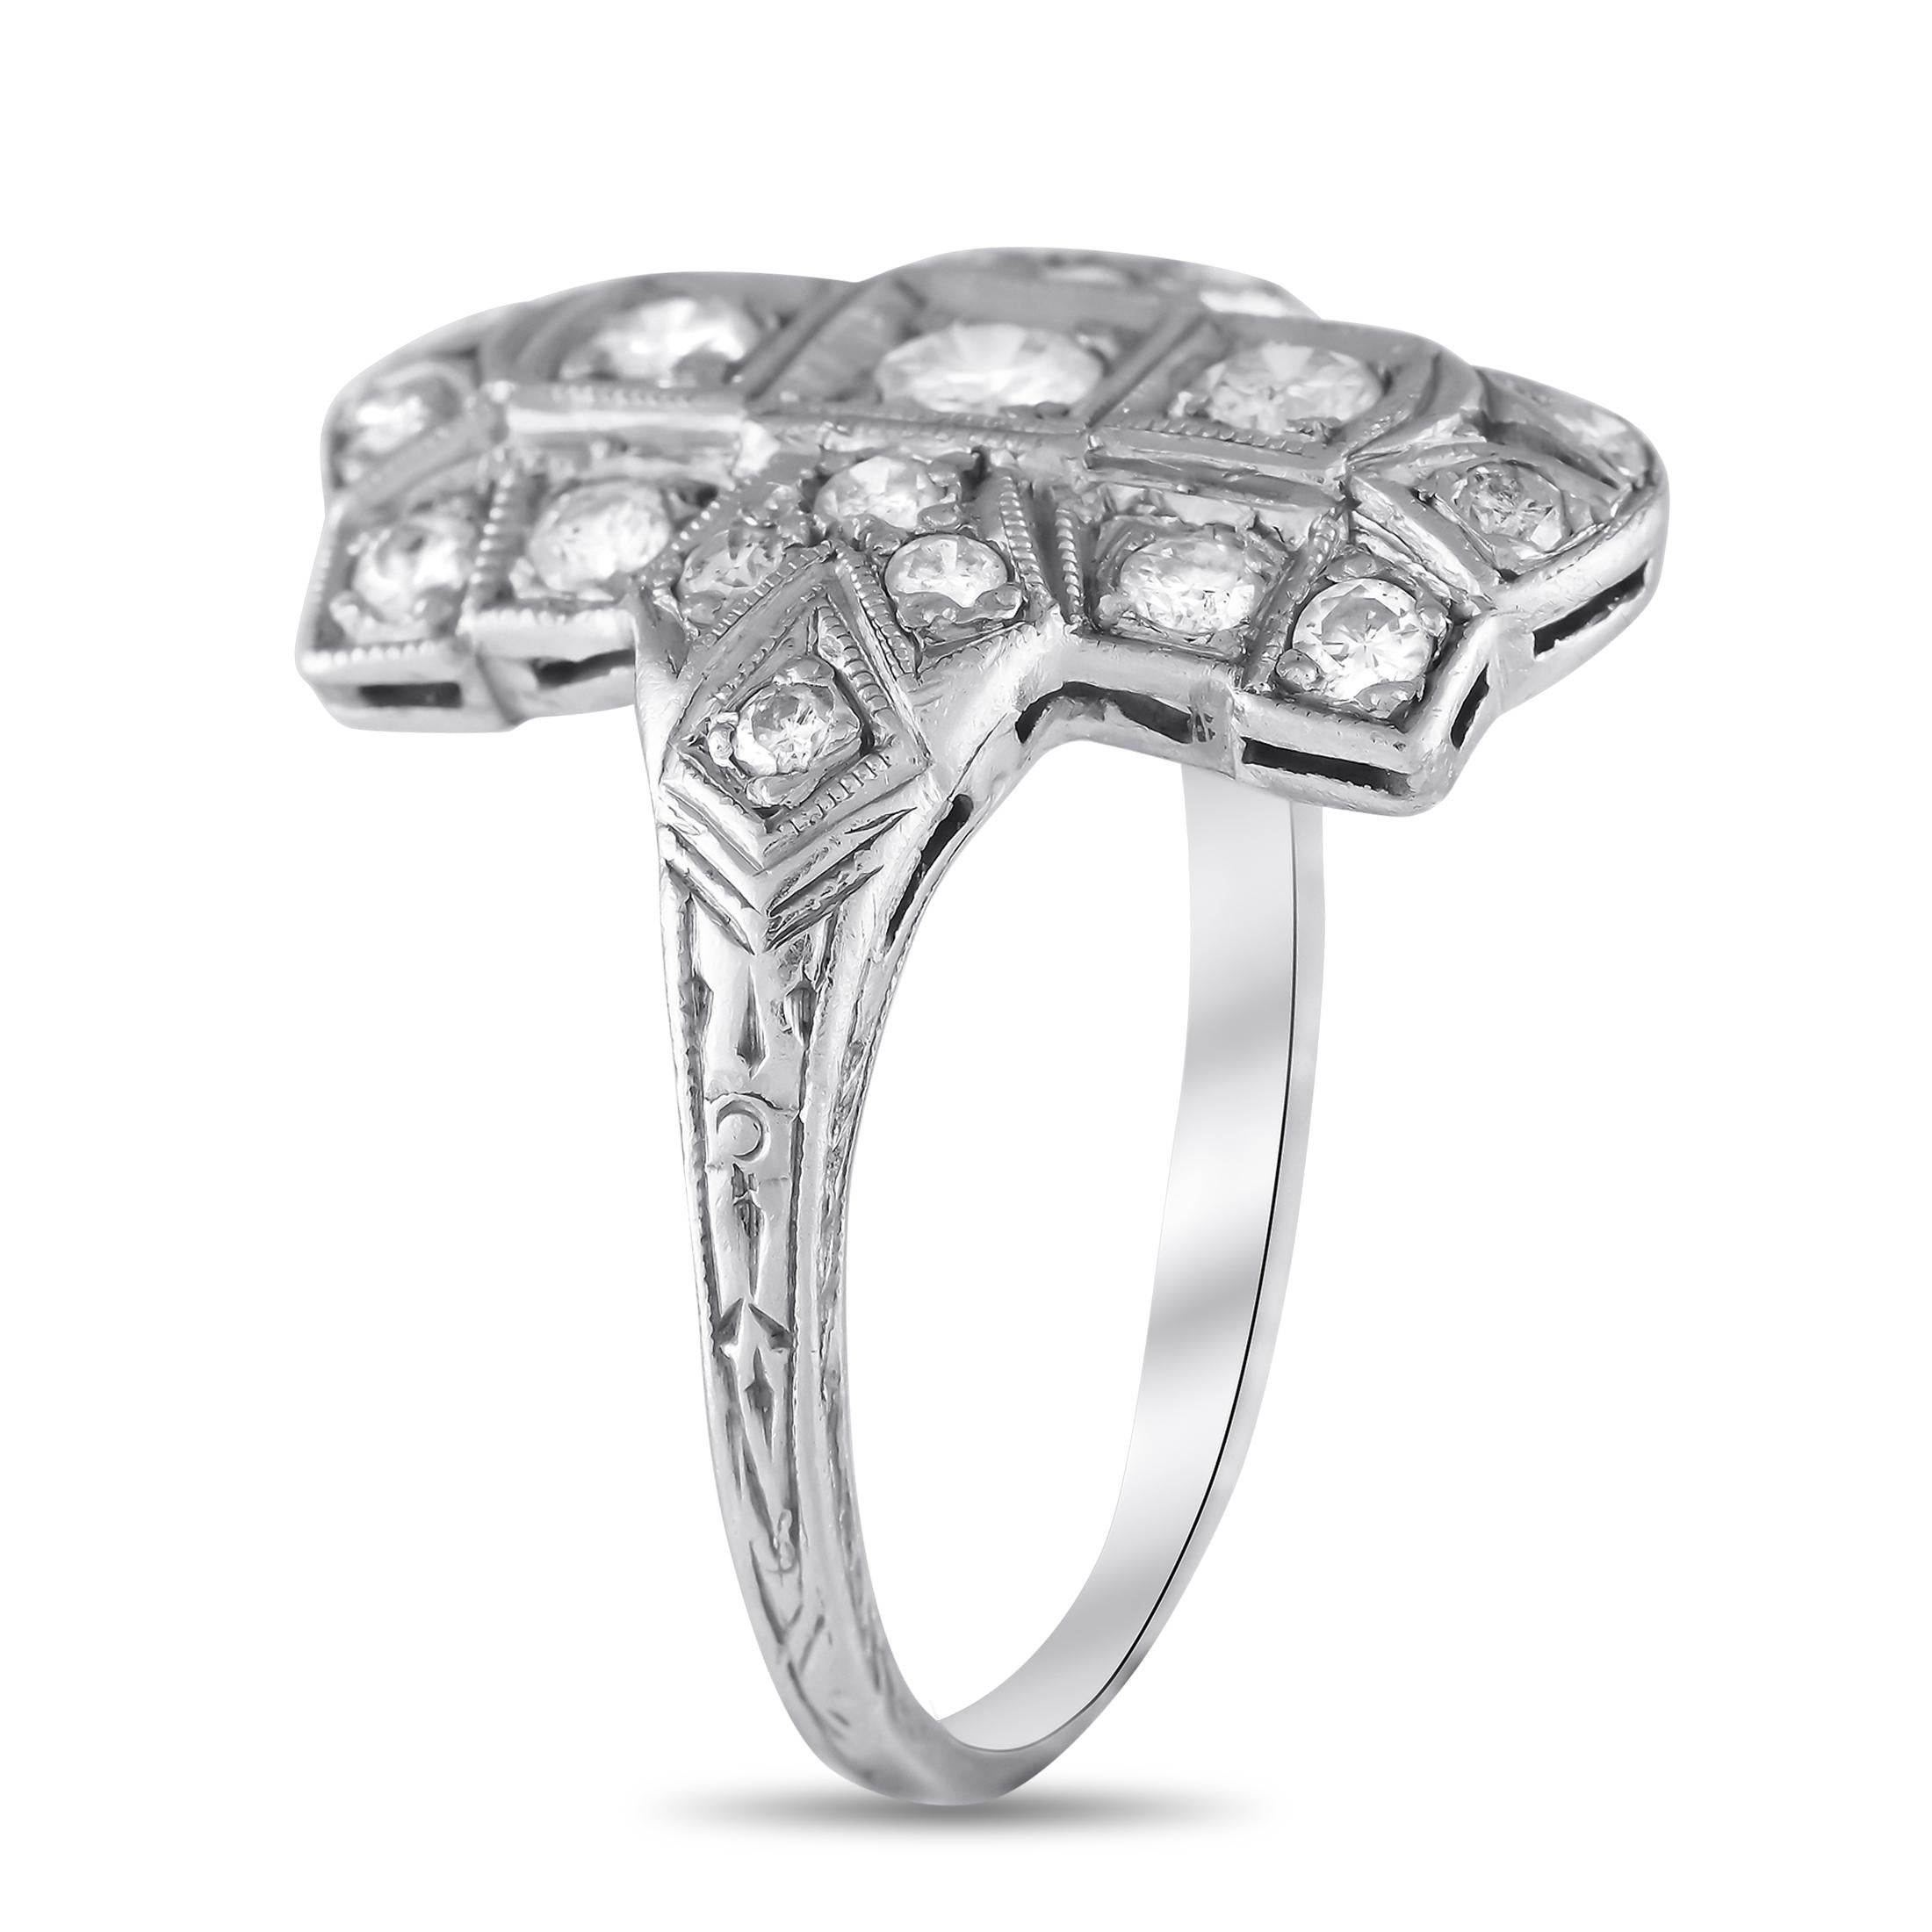 This antique ring is an easy way to add old fashioned elegance to any ensemble. Exquisite in design, the intricate Platinum setting comes to life thanks to inset Diamonds with a total weight of 0.60 carats. This timeless accessory features a 1mm